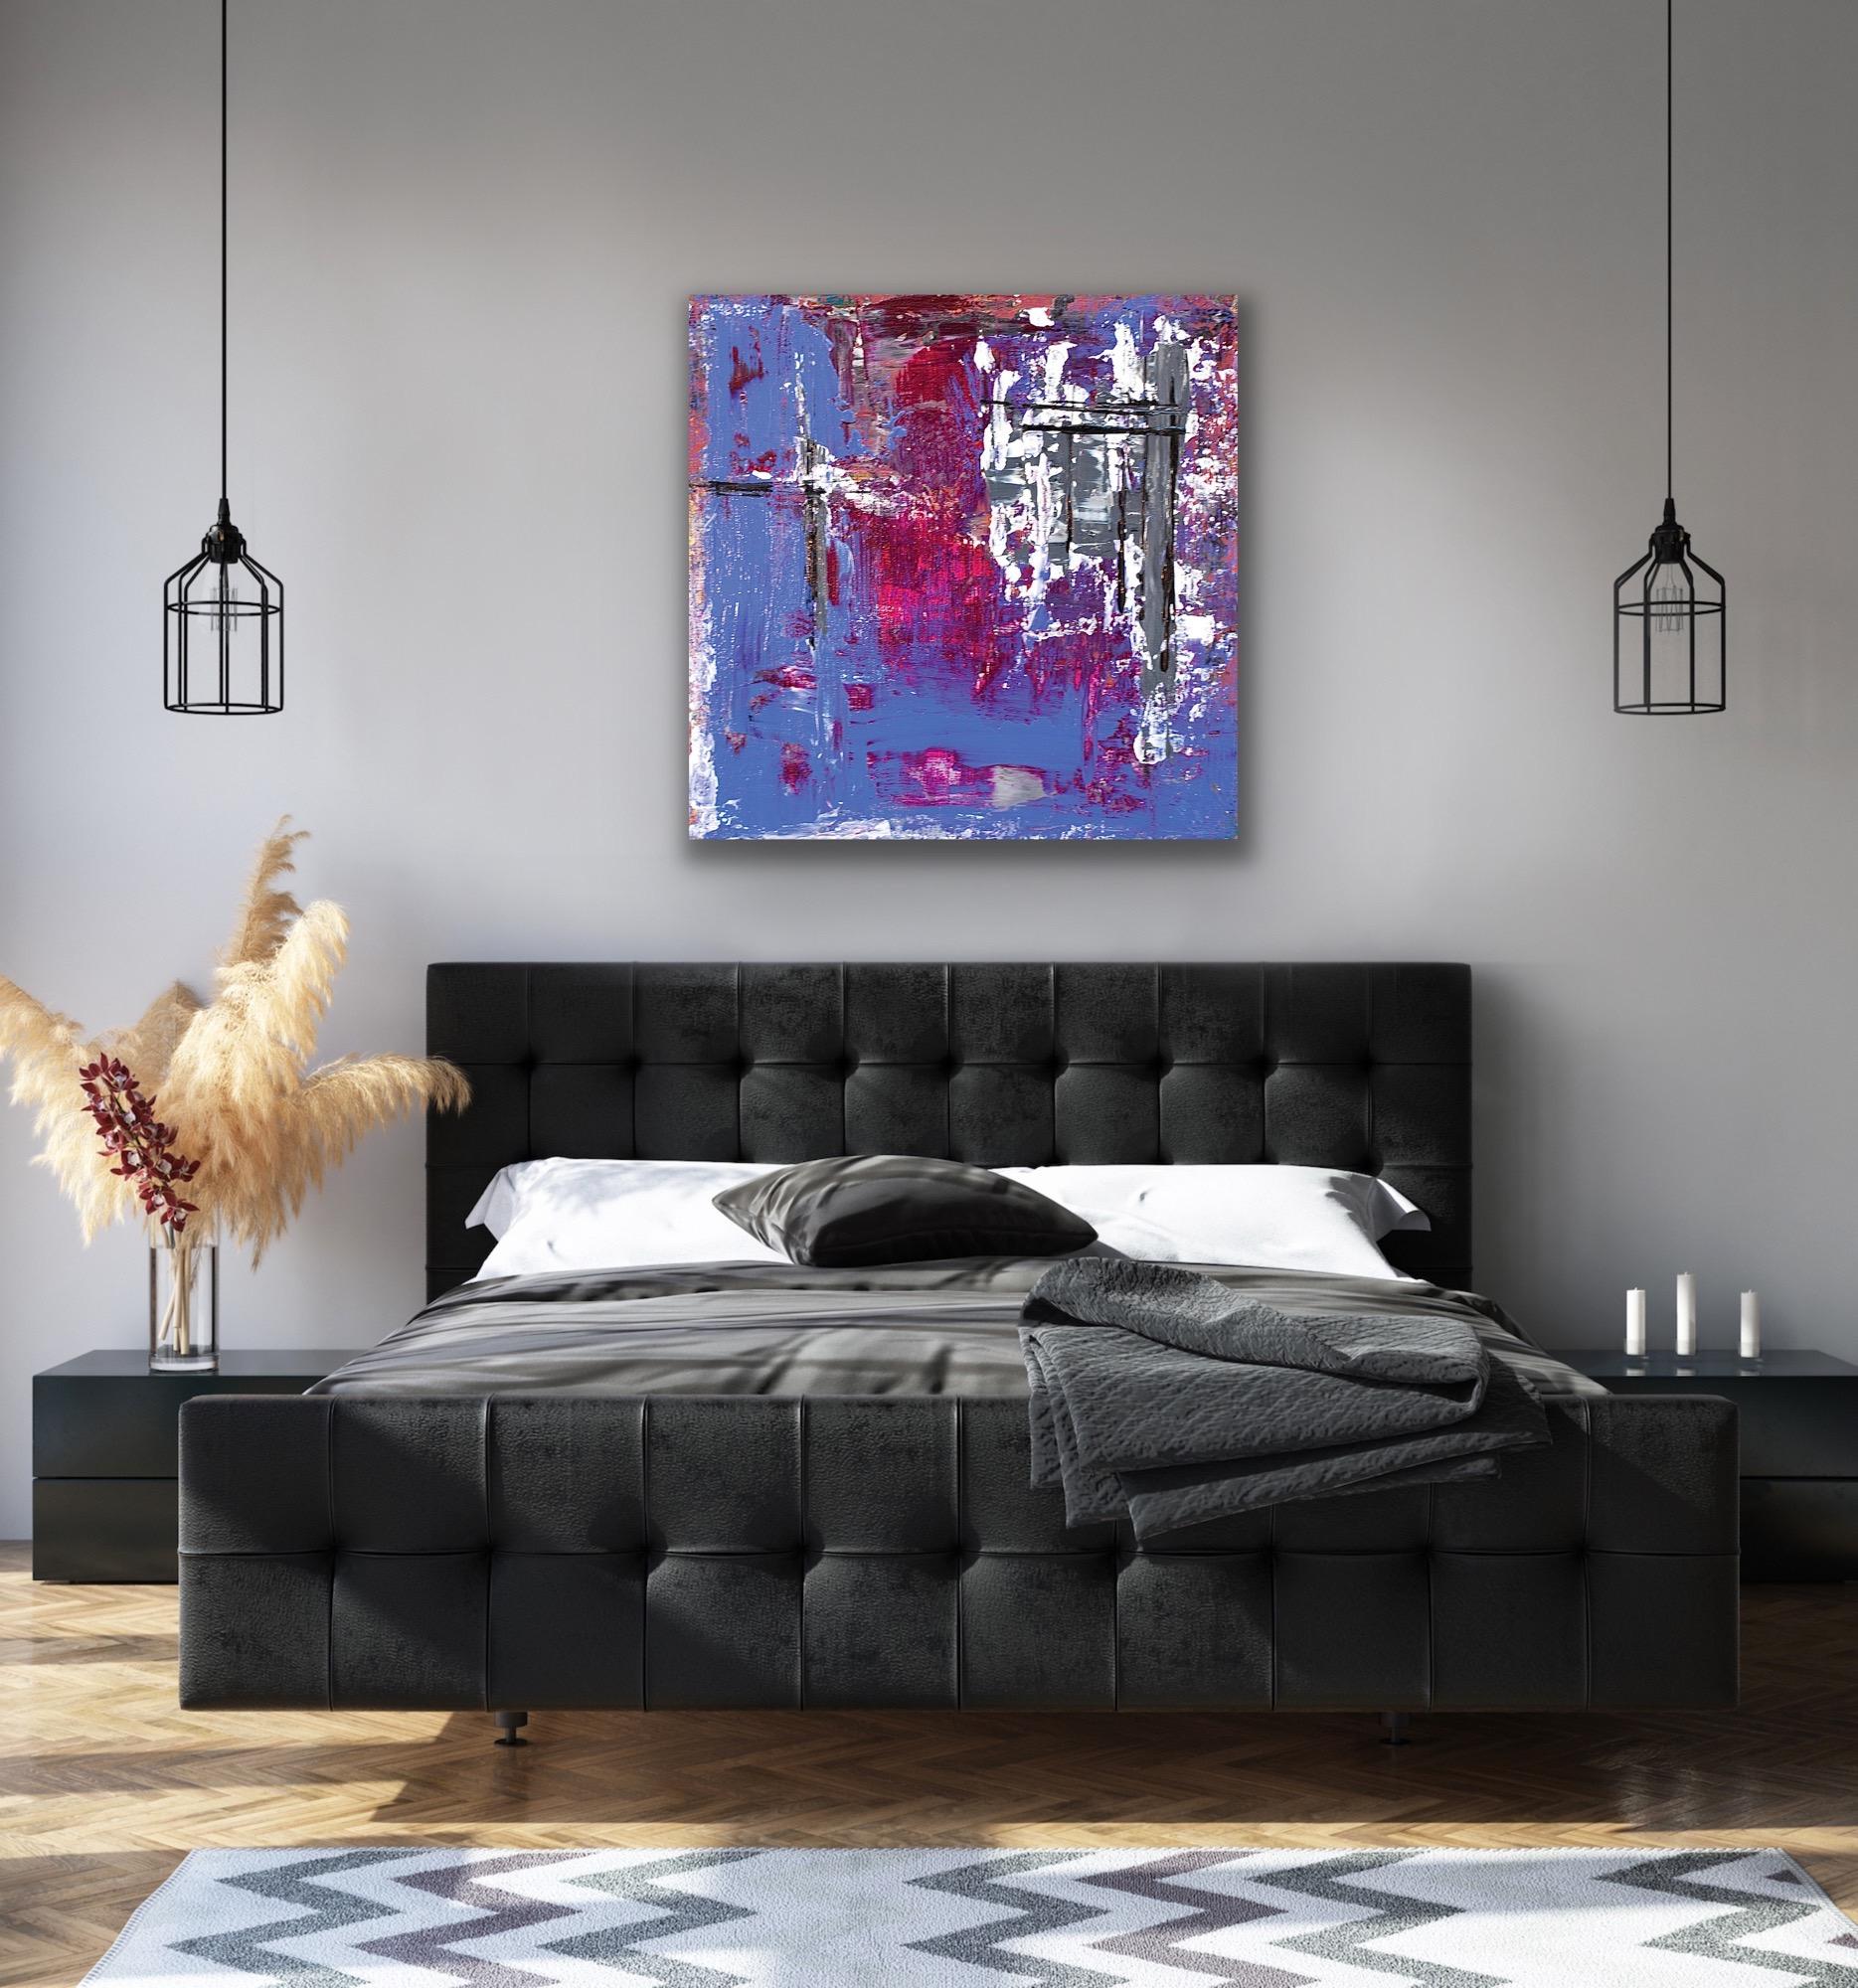 This modern abstract painting is printed on a lightweight metal composite and is suitable for indoor or outdoor decor. This open edition print of Celeste Reiter's original painting is signed by the artist. 

-Artist: Celeste Reiter
-Limited Edition